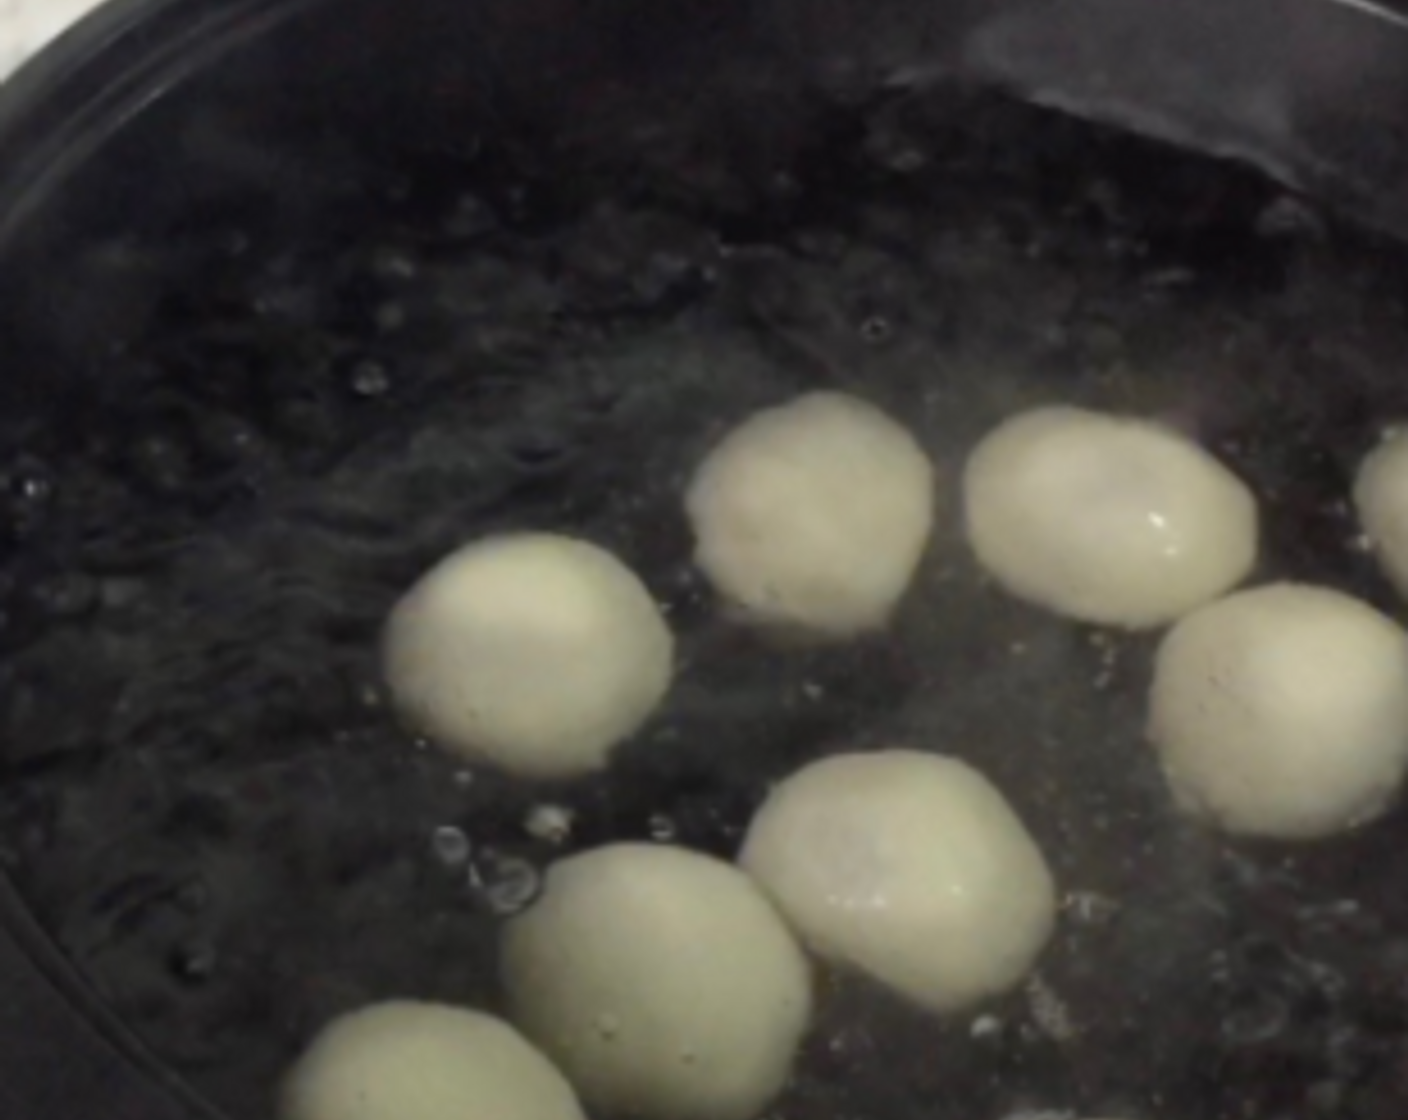 step 23 To cook the glutinous rice balls, first boil a pot of water. Then put in the glutinous rice balls. Be sure not to overcrowd the pot. Stir occasionally to prevent sticking.